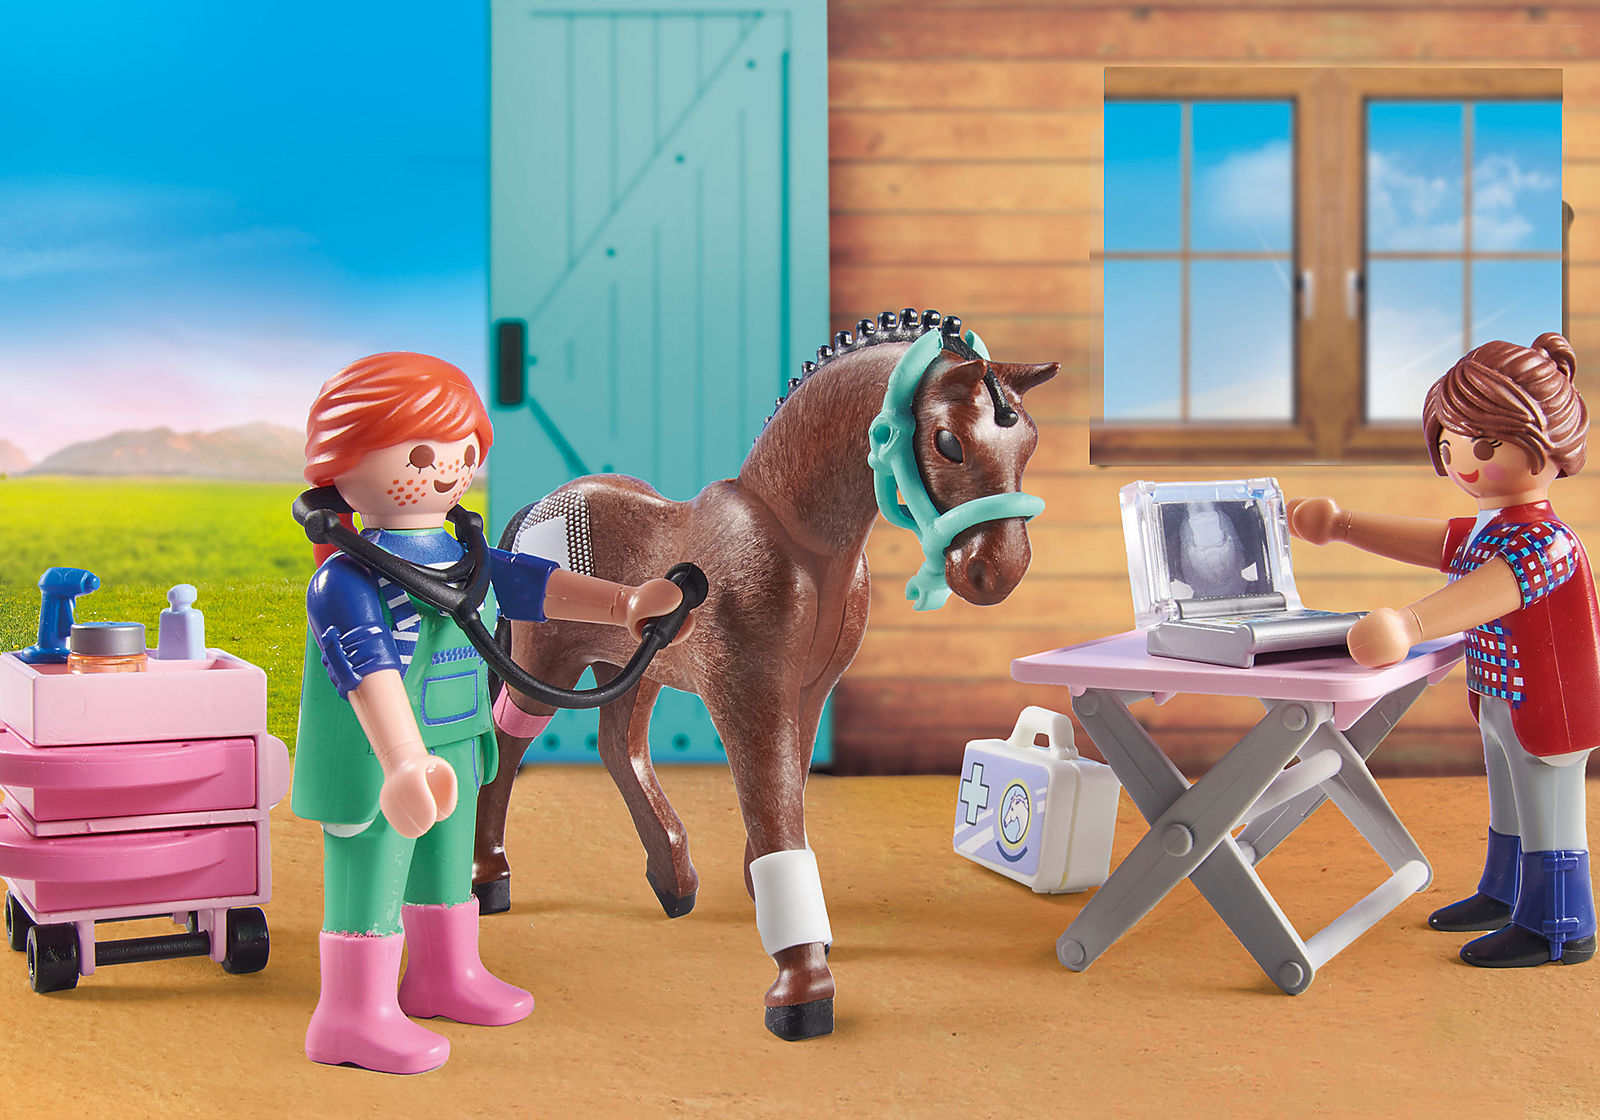 Playmobil - Cheval - Country - 28 pièces - 70294